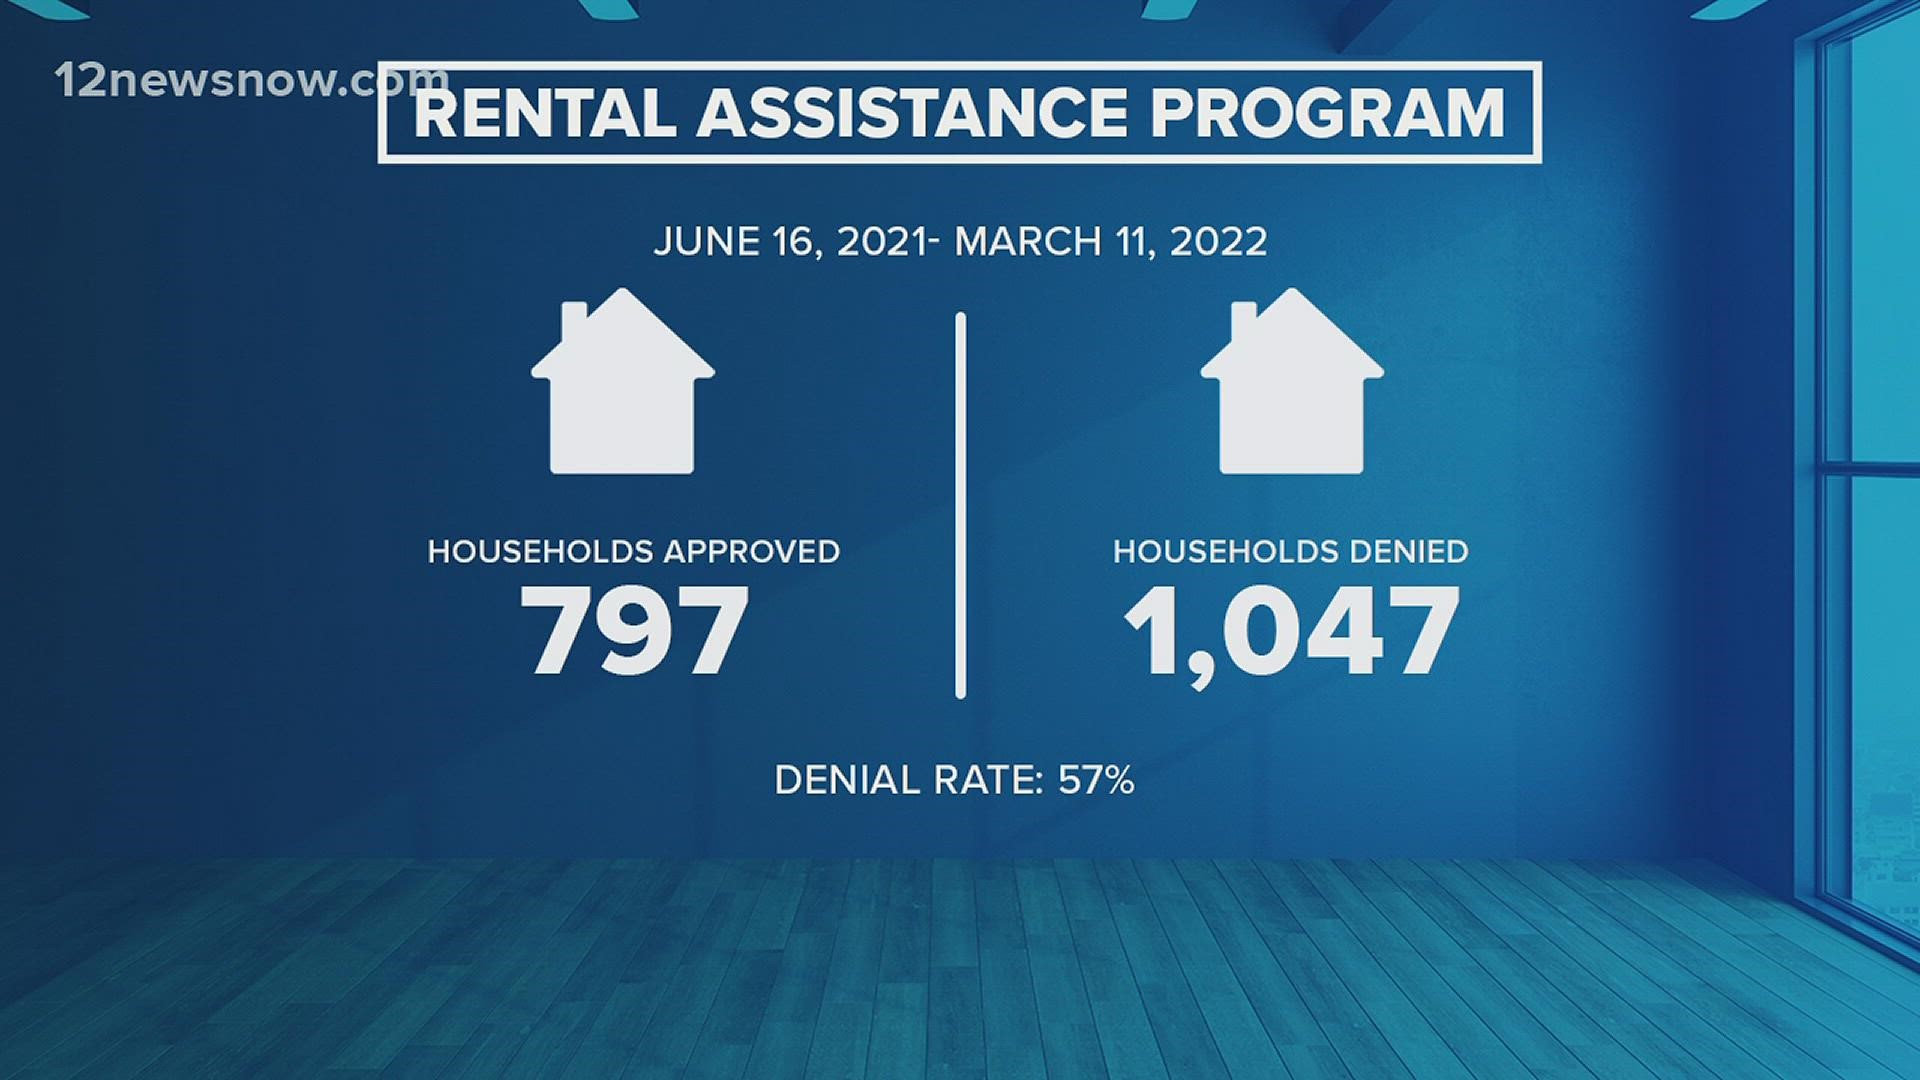 Fifty seven percent of renters who applied for rental assistance in Jefferson County were denied.